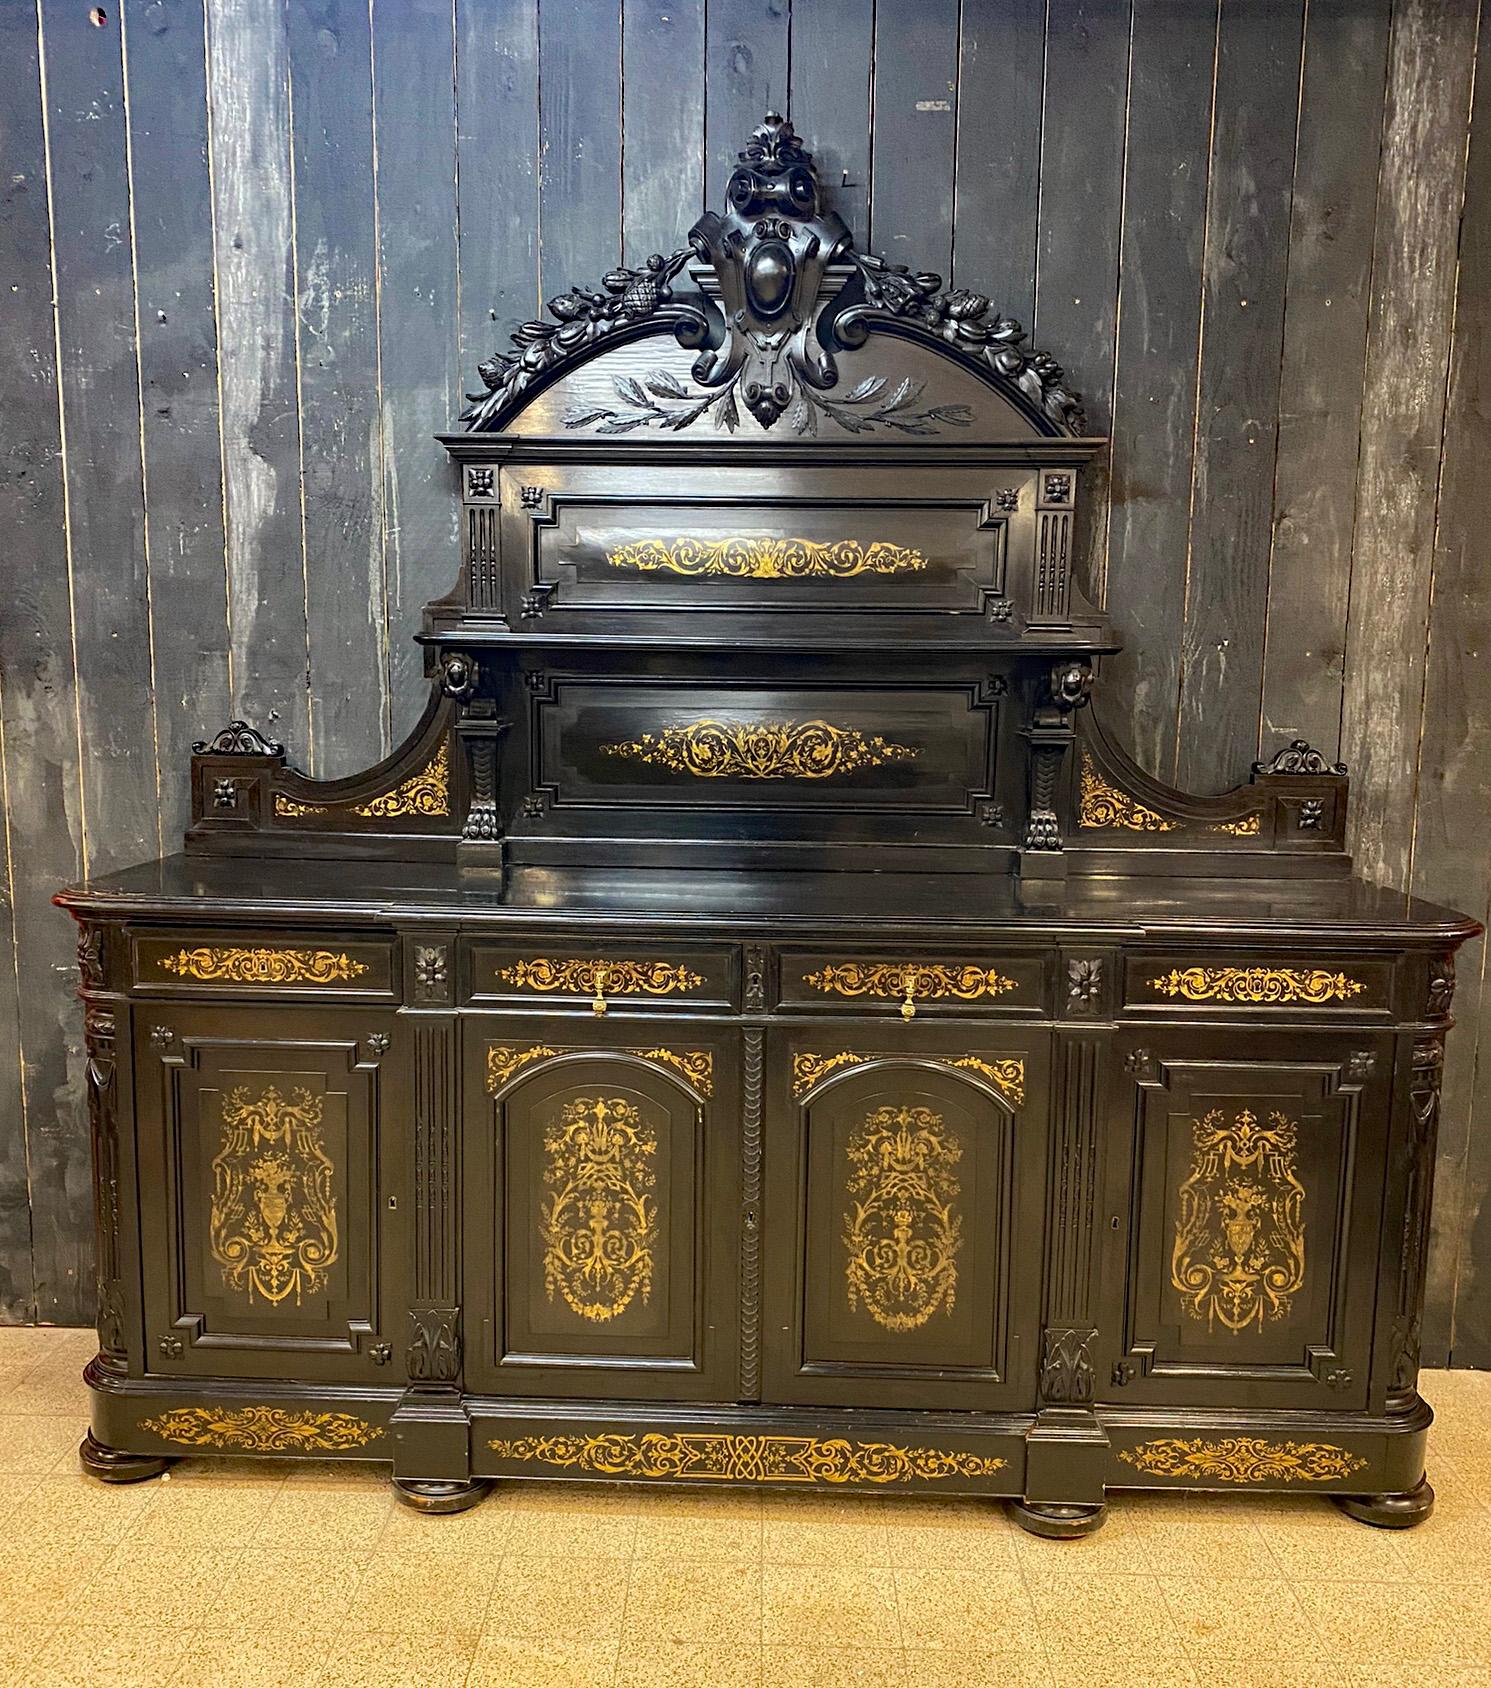 rare large sideboard in blackened pear with inlaid brass decorations, Napoleon III period
top quality.
small flaws, but overall in good condition.